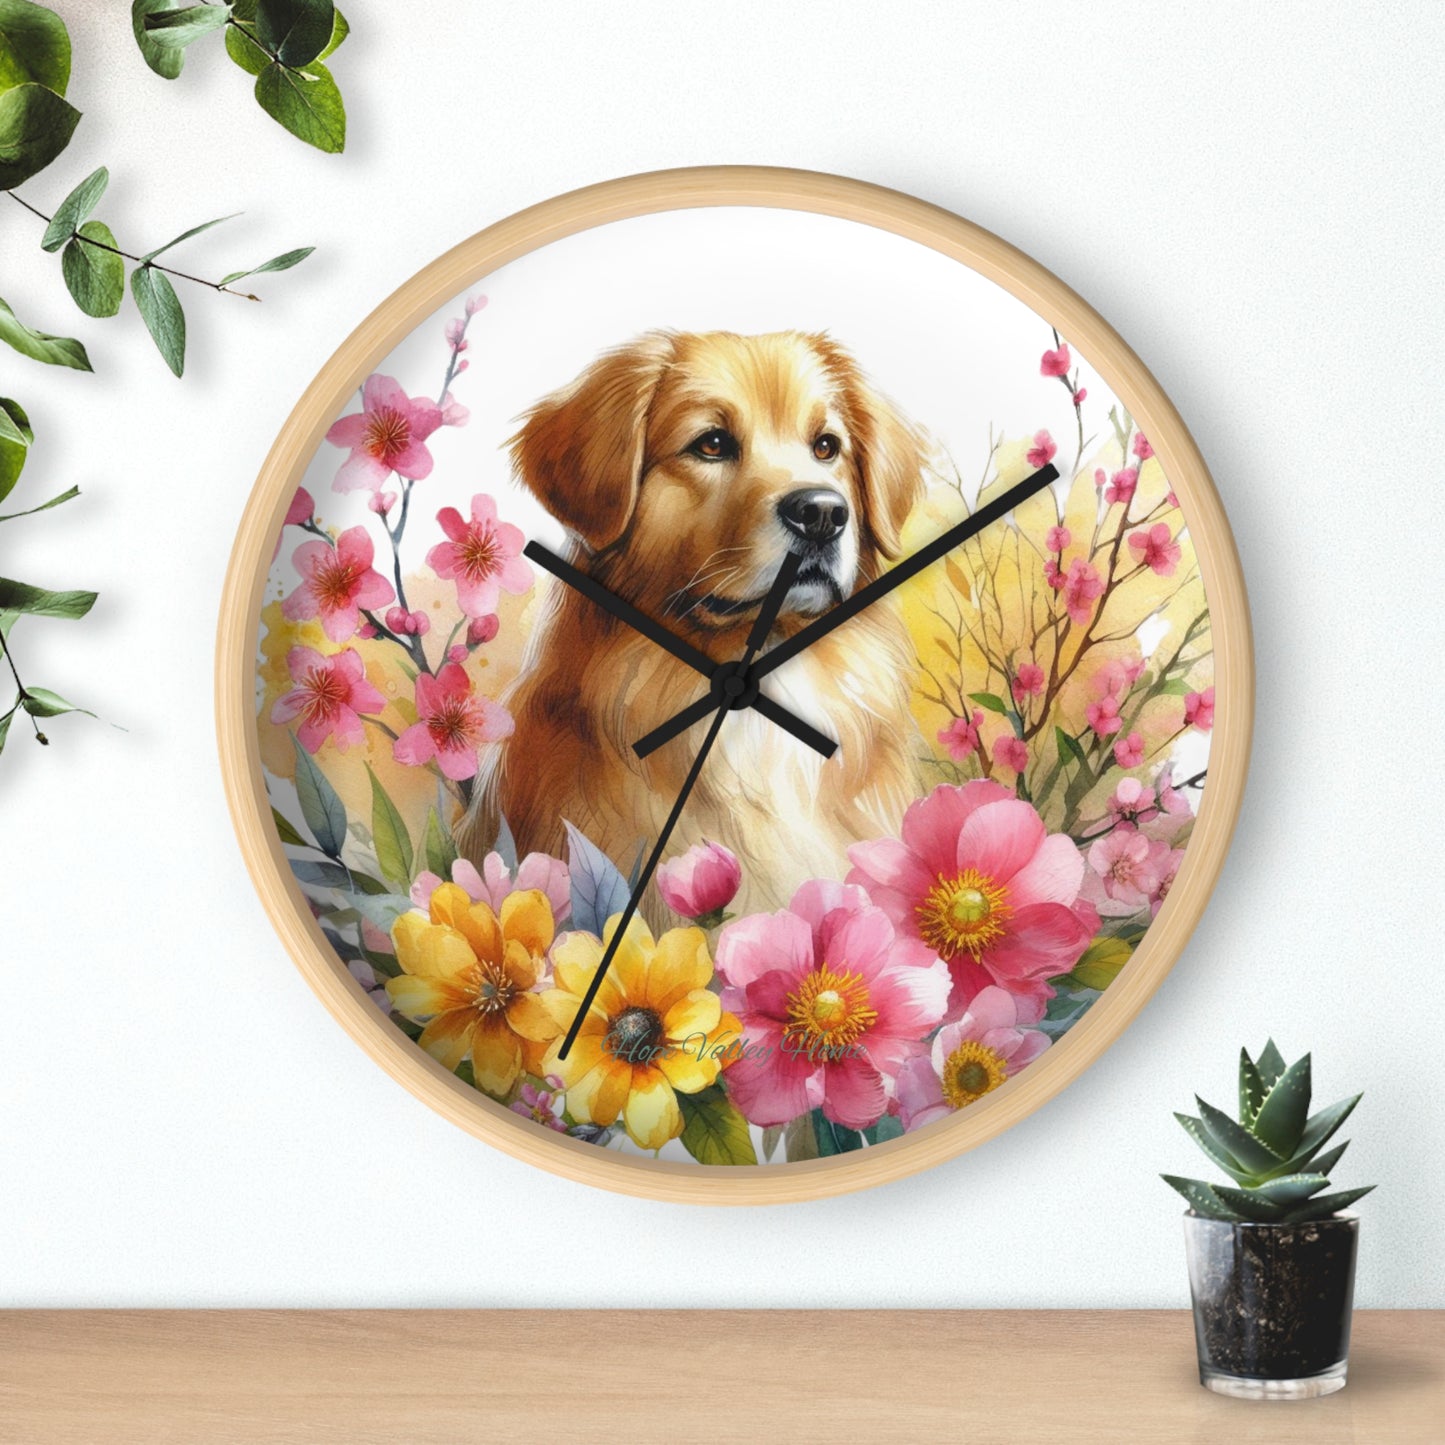 Golden Retriever Wall Clock | Wall Art and Giftware by Hope Valley Home